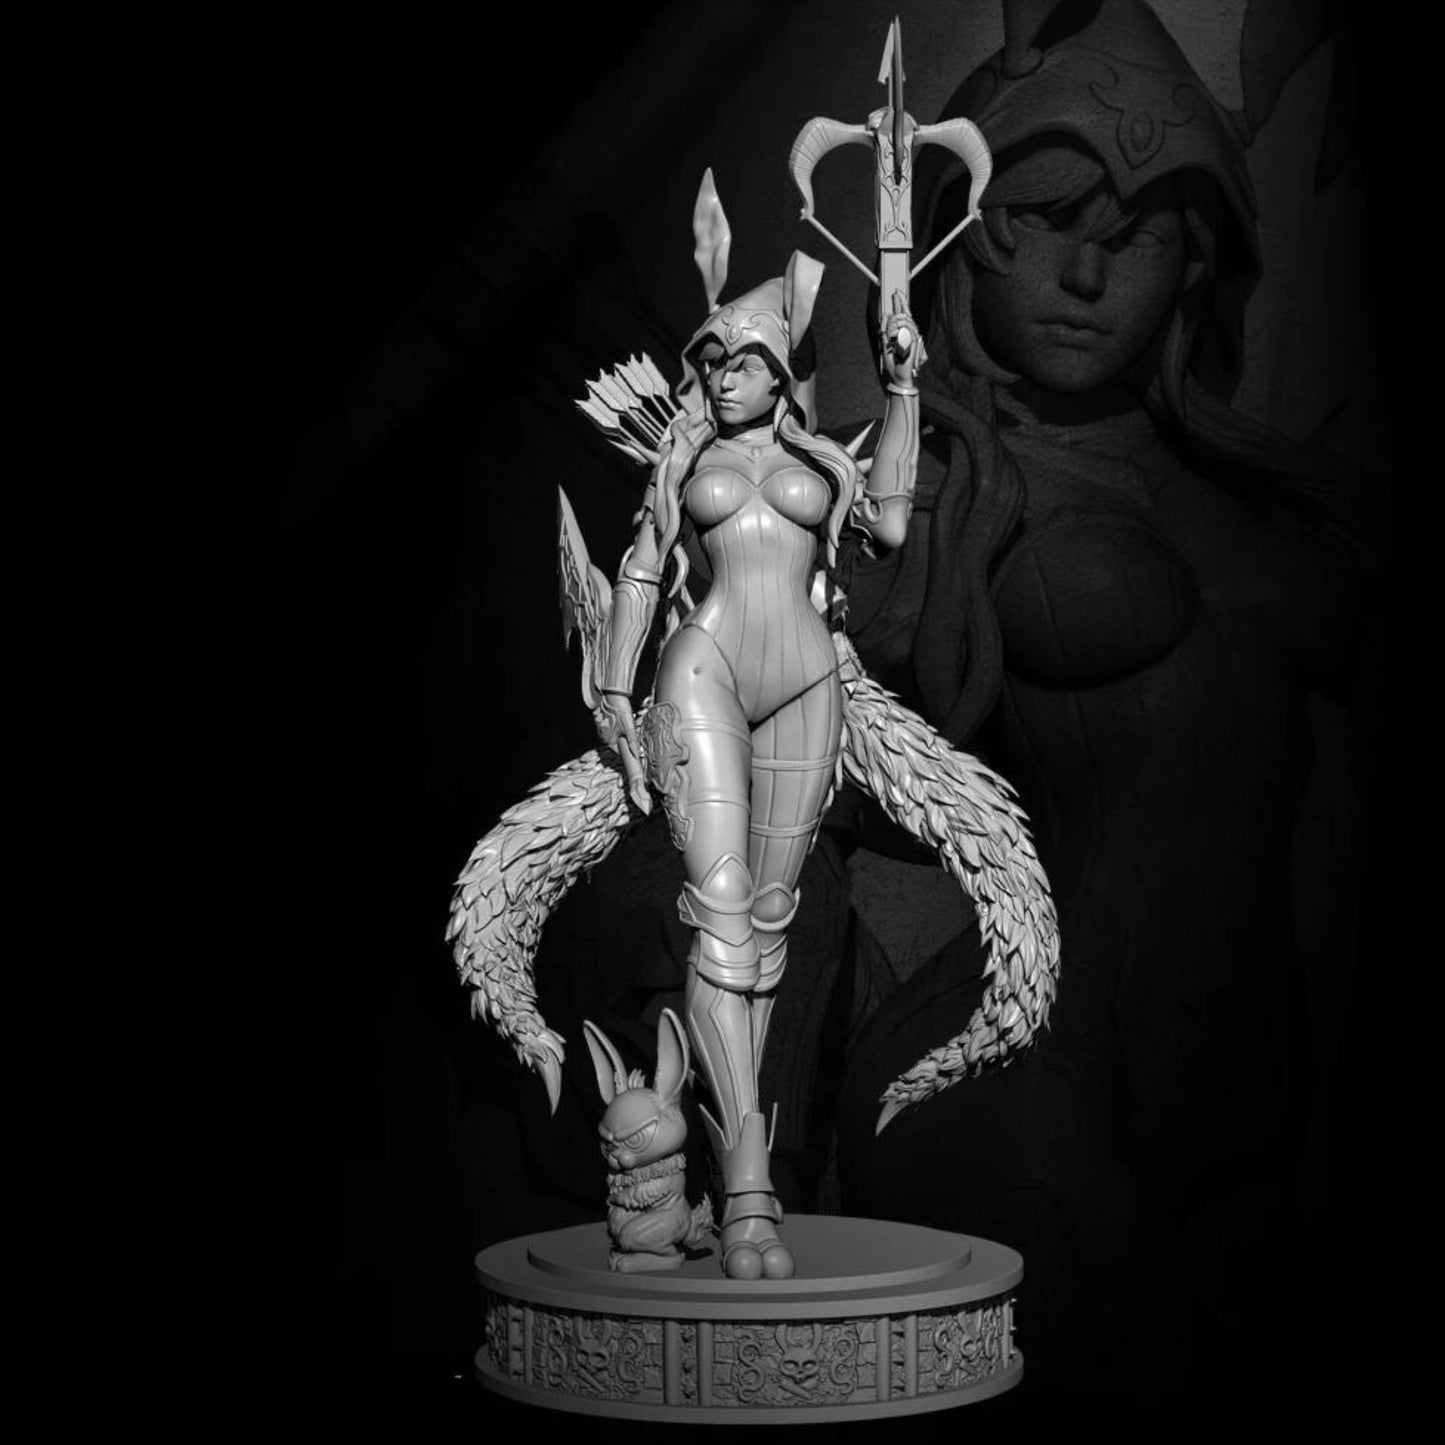 18+ Collector's 3D Printed Model: 75mm 1/24 Resin model kits figure beauty colorless and self-assembled.